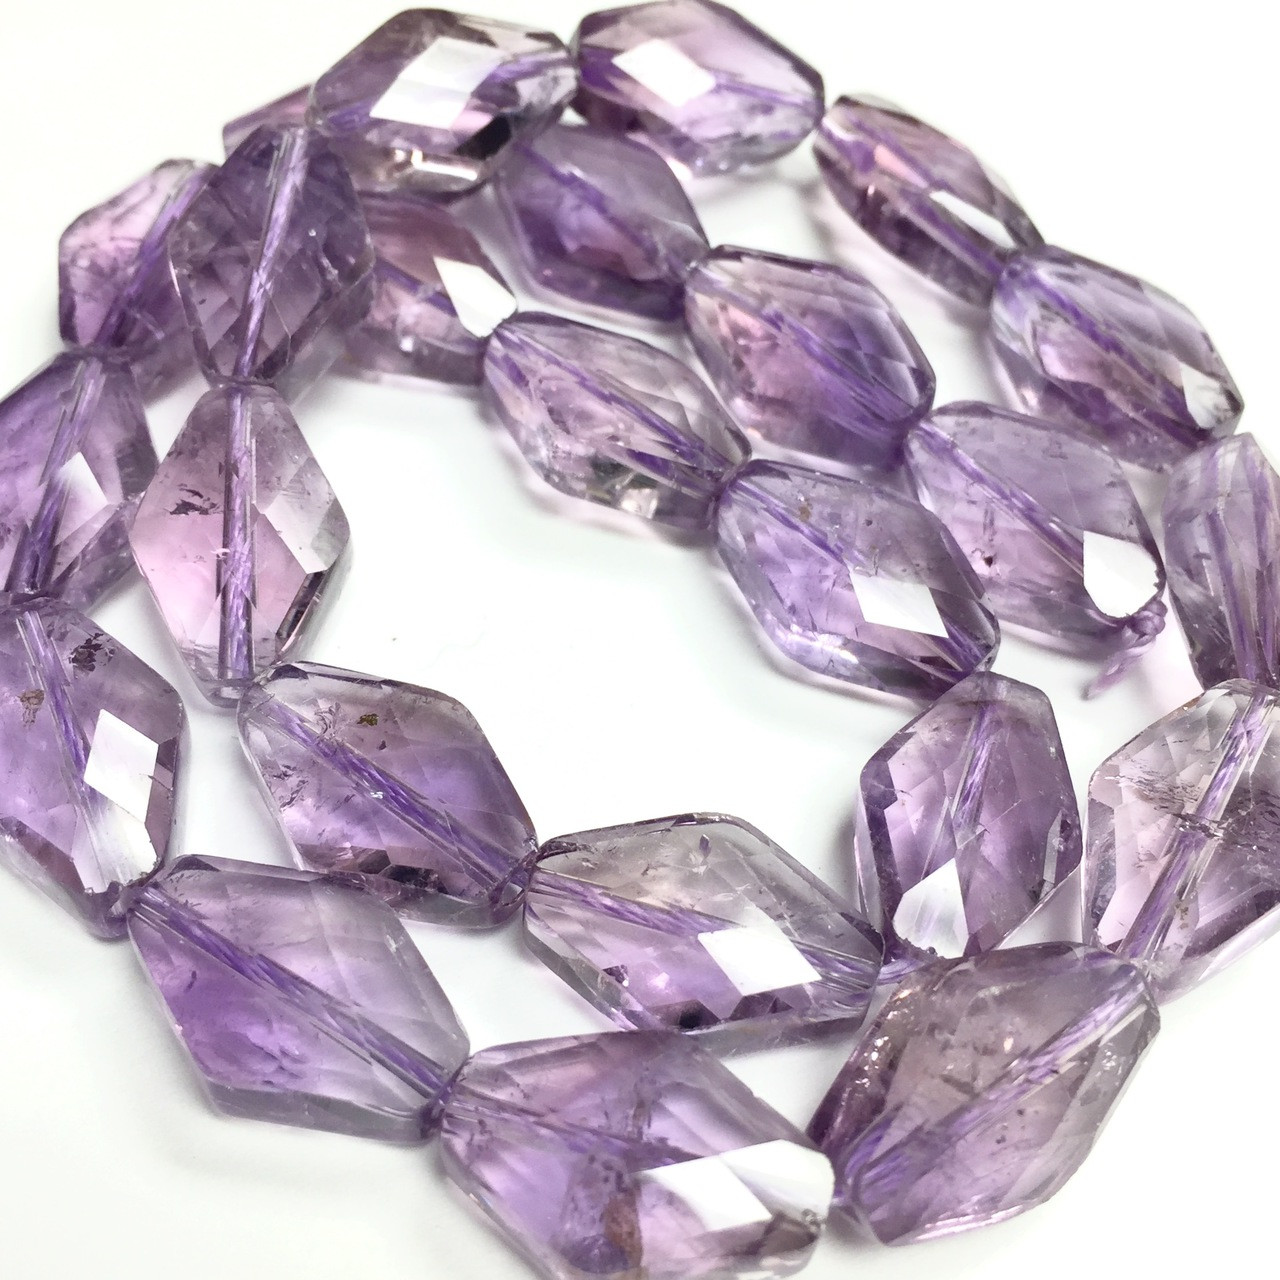  Faceted Natural Stone Beads Rose Quartz Amethyst